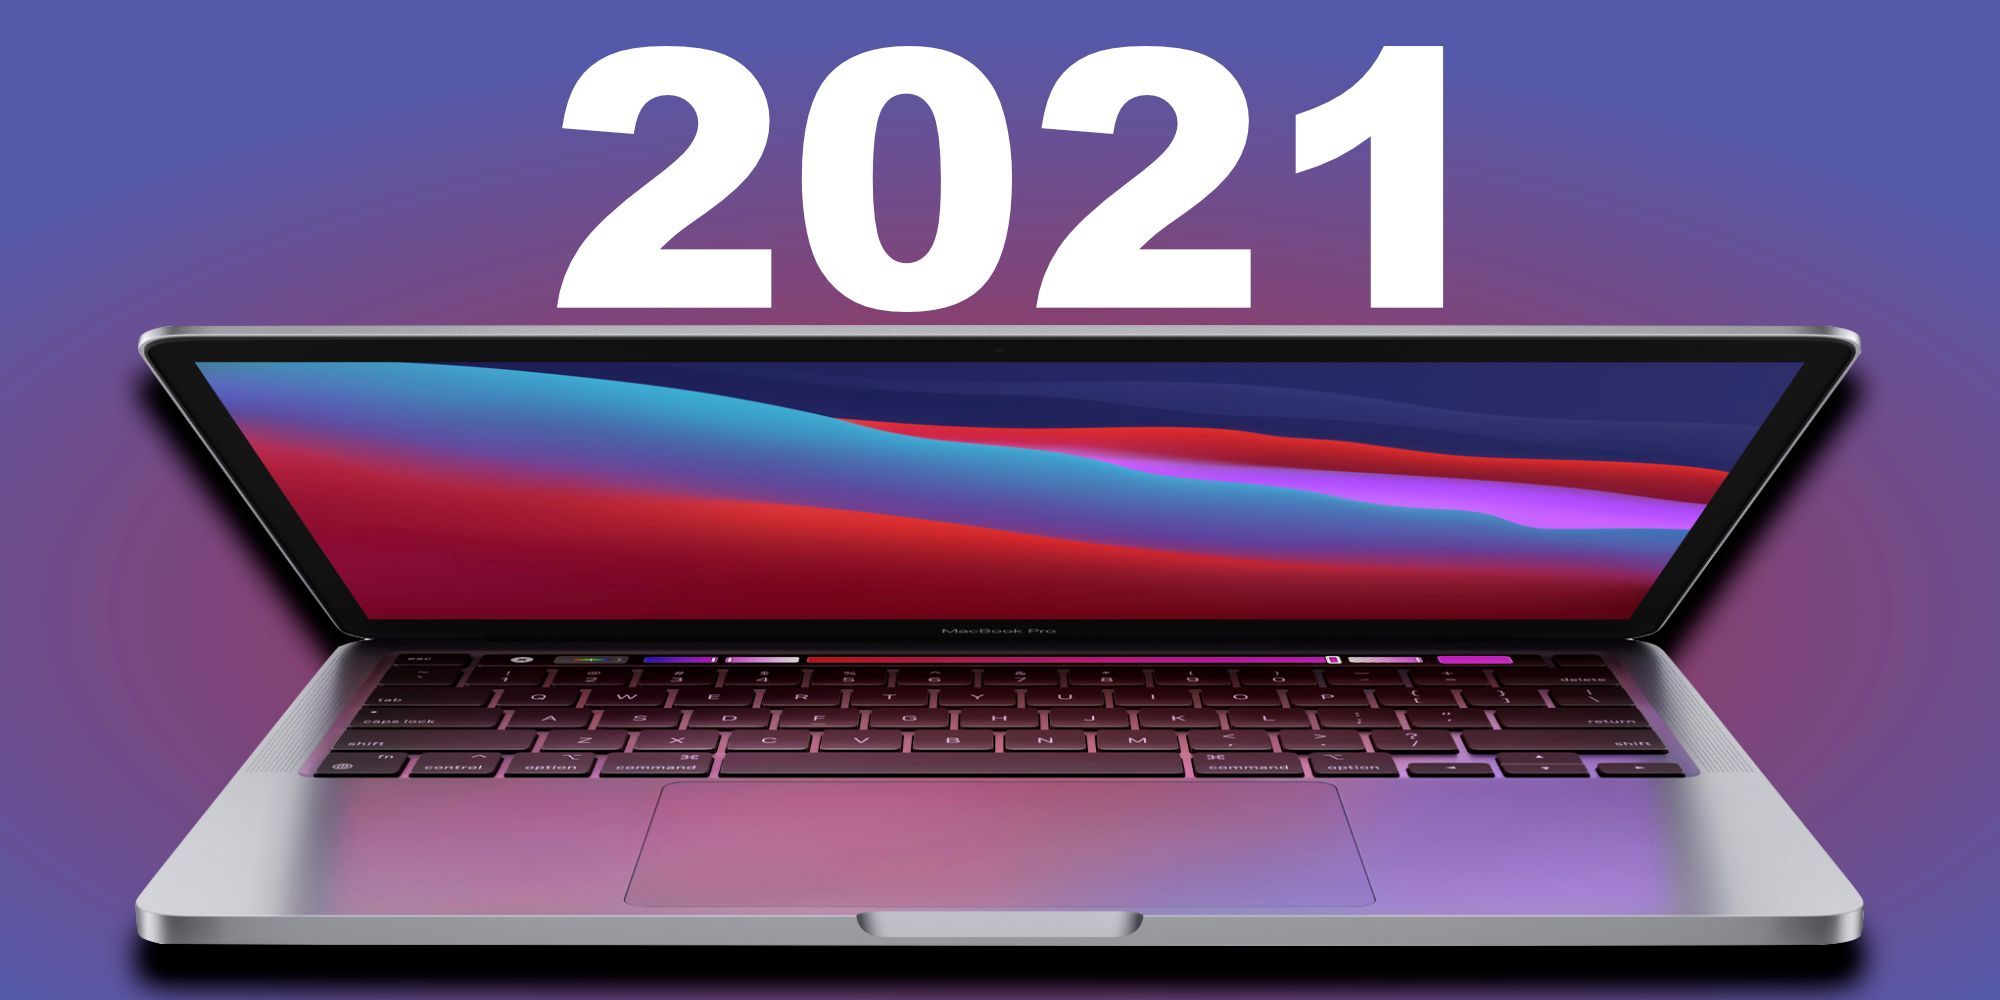 MacBook Pro with '2021' text above it